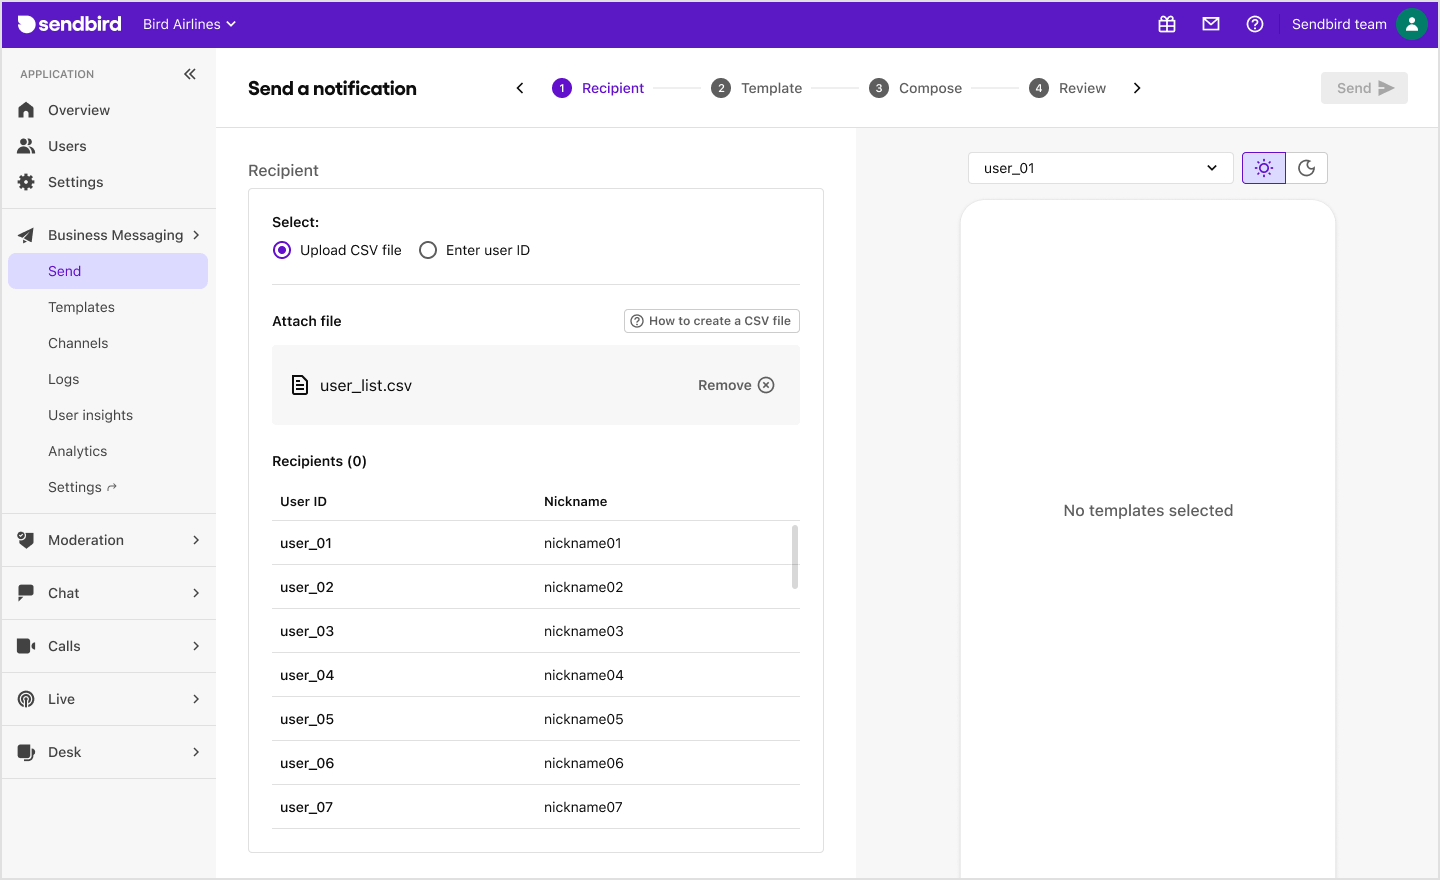 image|The Send page under Business Messaging on Sendbird Dashboard